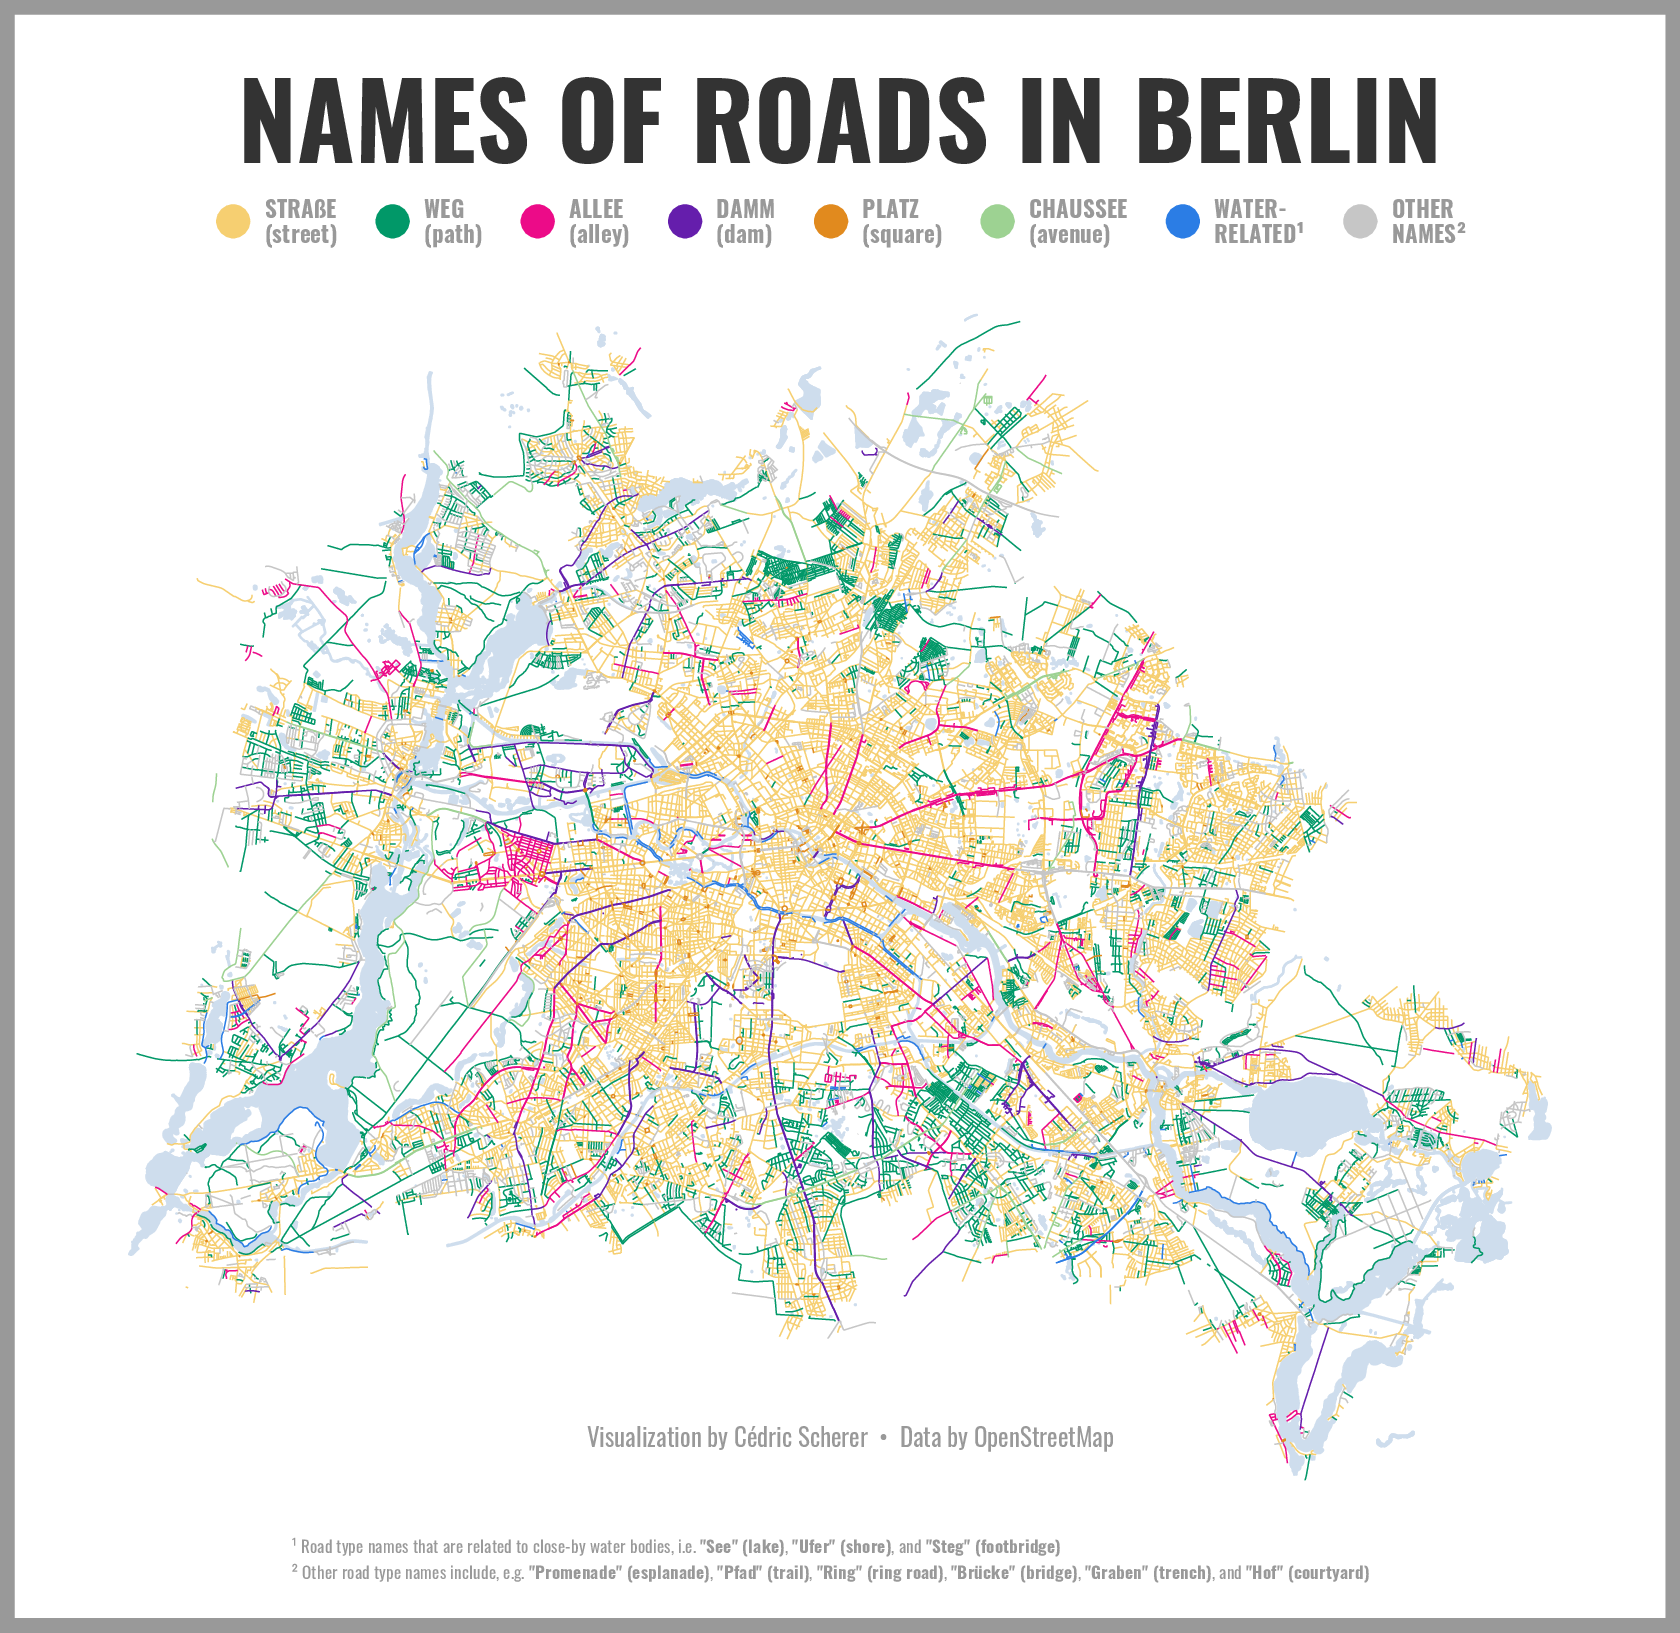 ./Day15_Names/Names_BerlinRoads.png